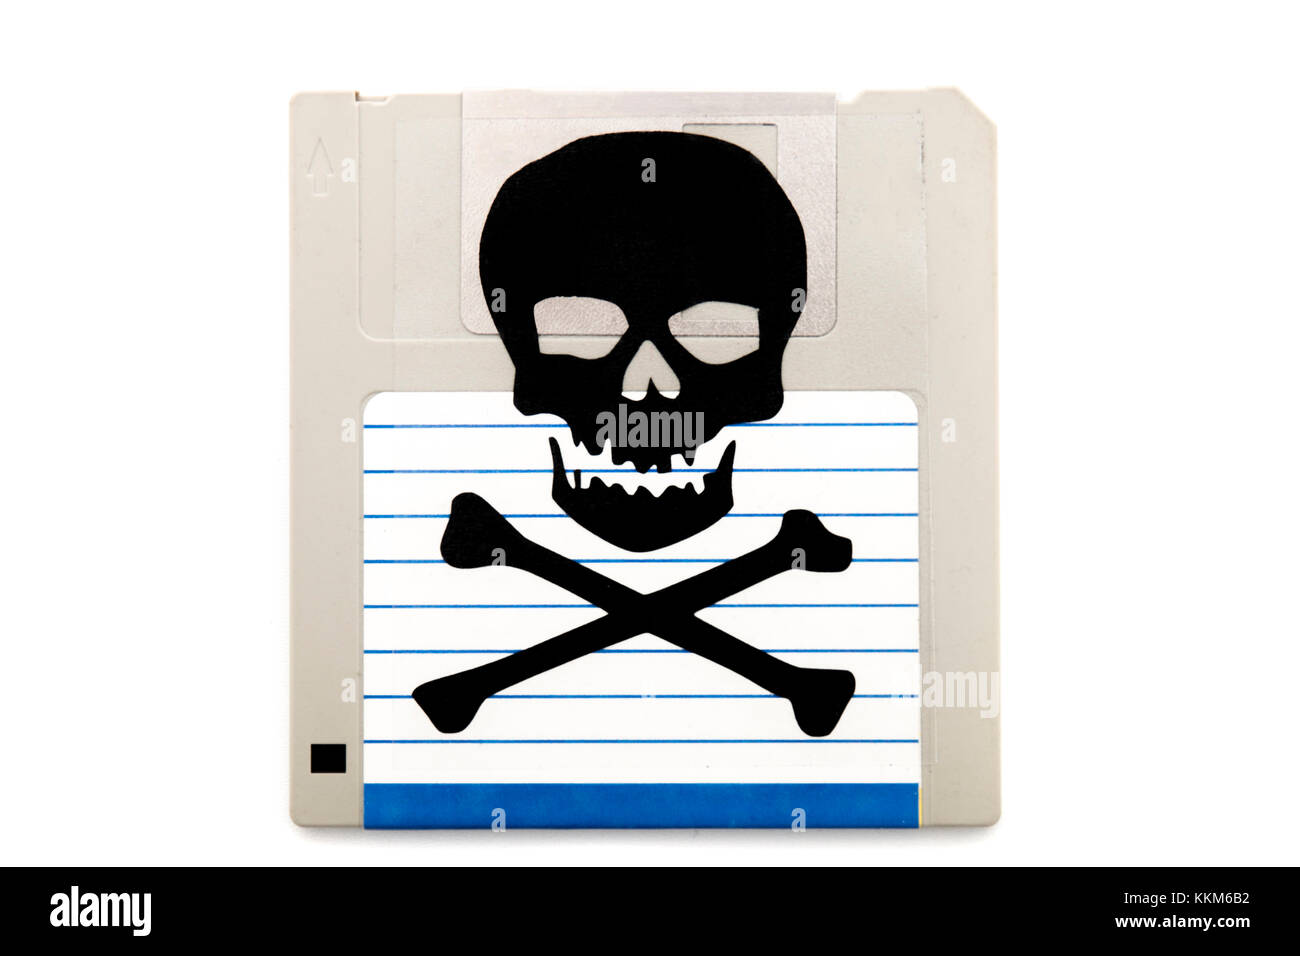 Close up view of a infected computer floppy disk isolated on a white background. Conceptual image with skull and bones. Stock Photo